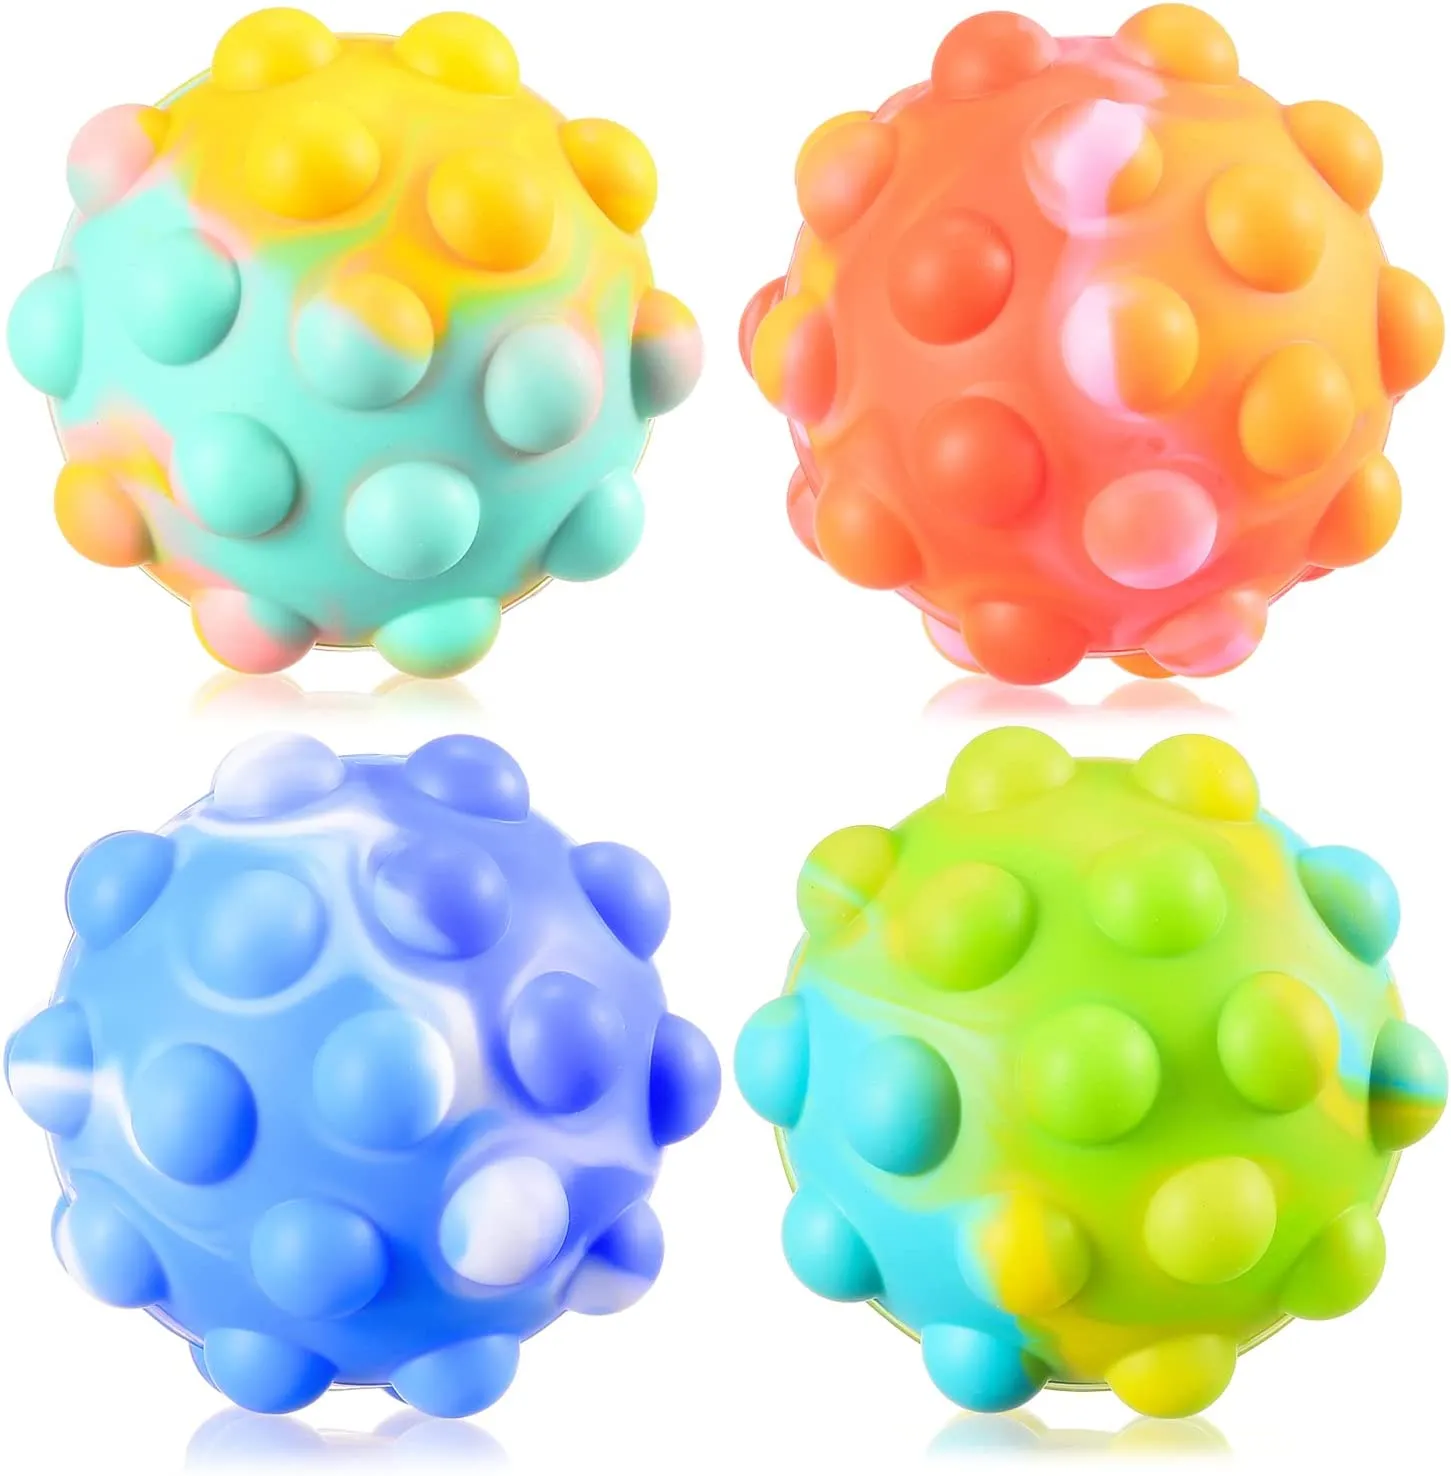 Anti Pressure Popper Sensory Toys 3D Squeeze Pop Ball Its Fidget Toy Bath Toys Stress Balls for Kids Adults Over 1 Years